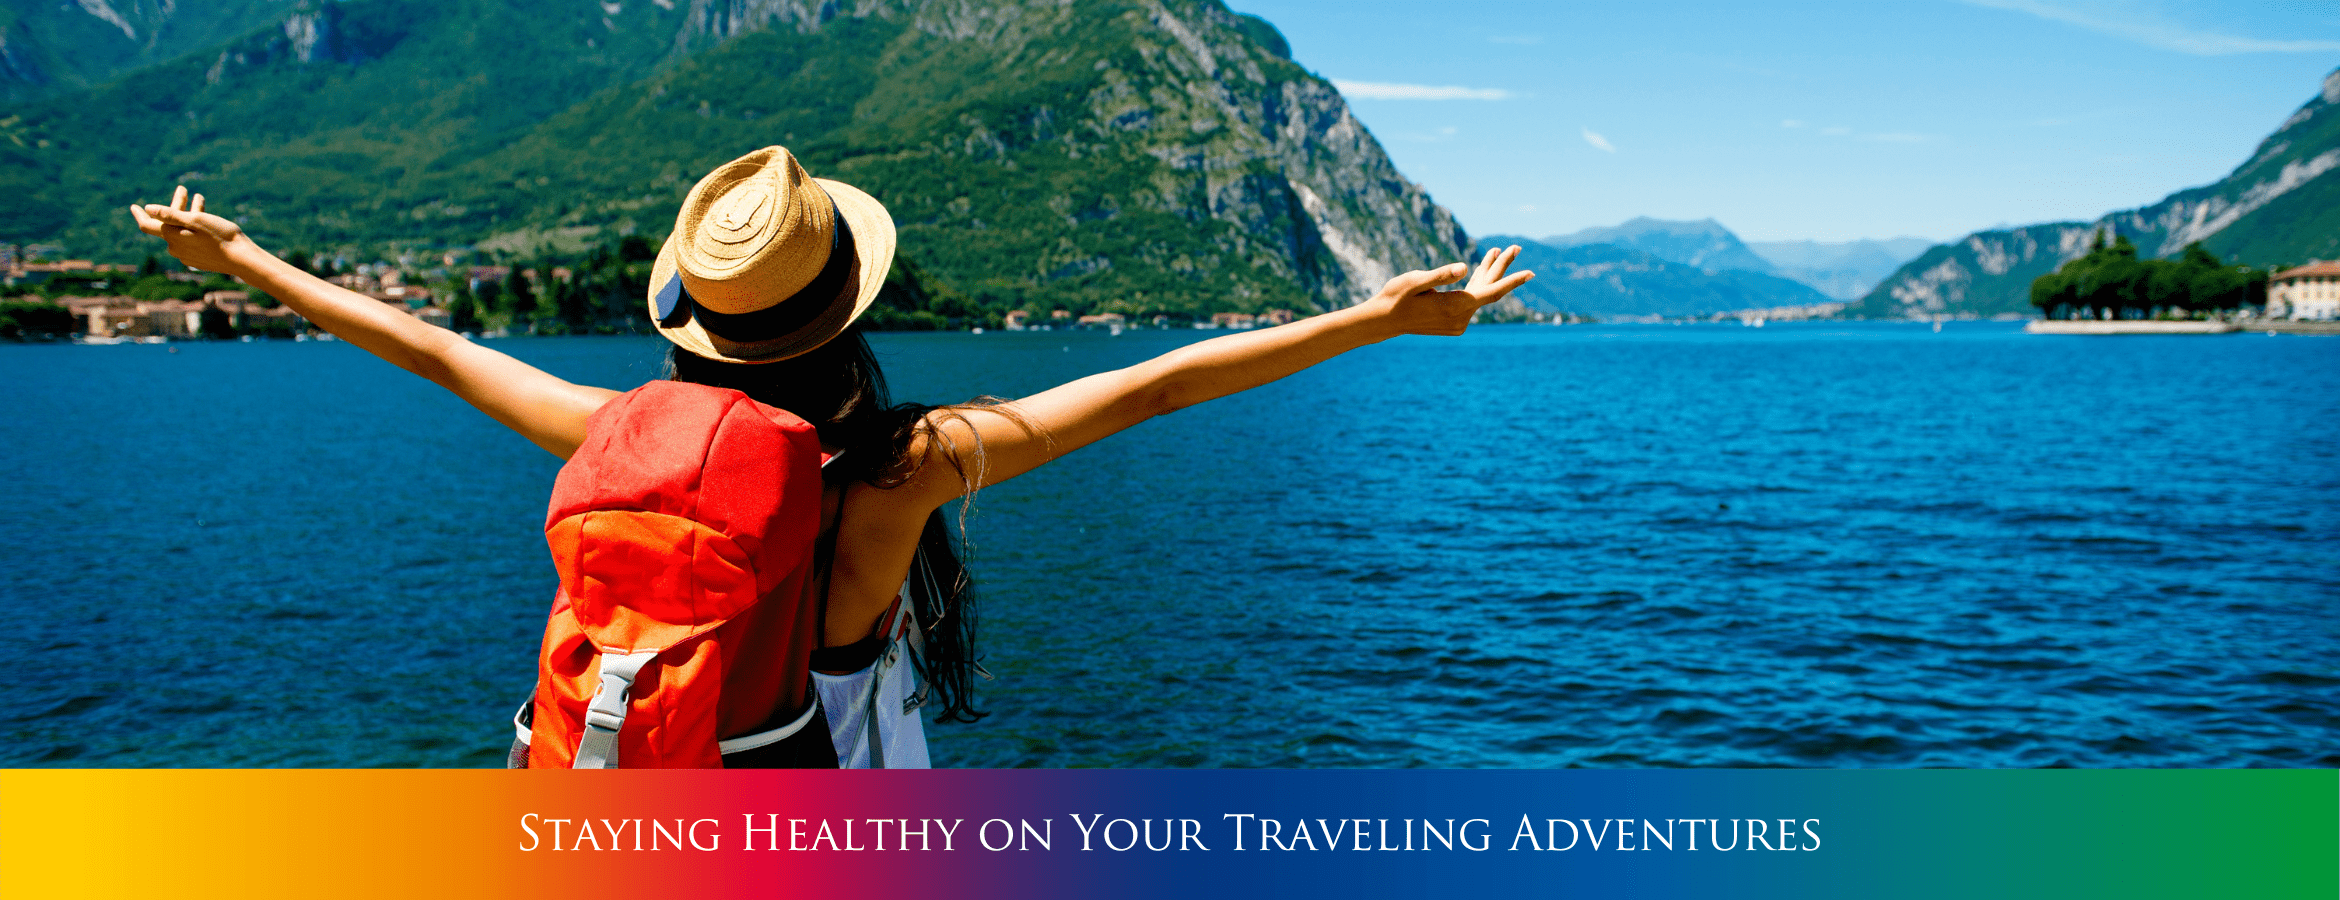 Staying Healthy on Your Traveling Adventures